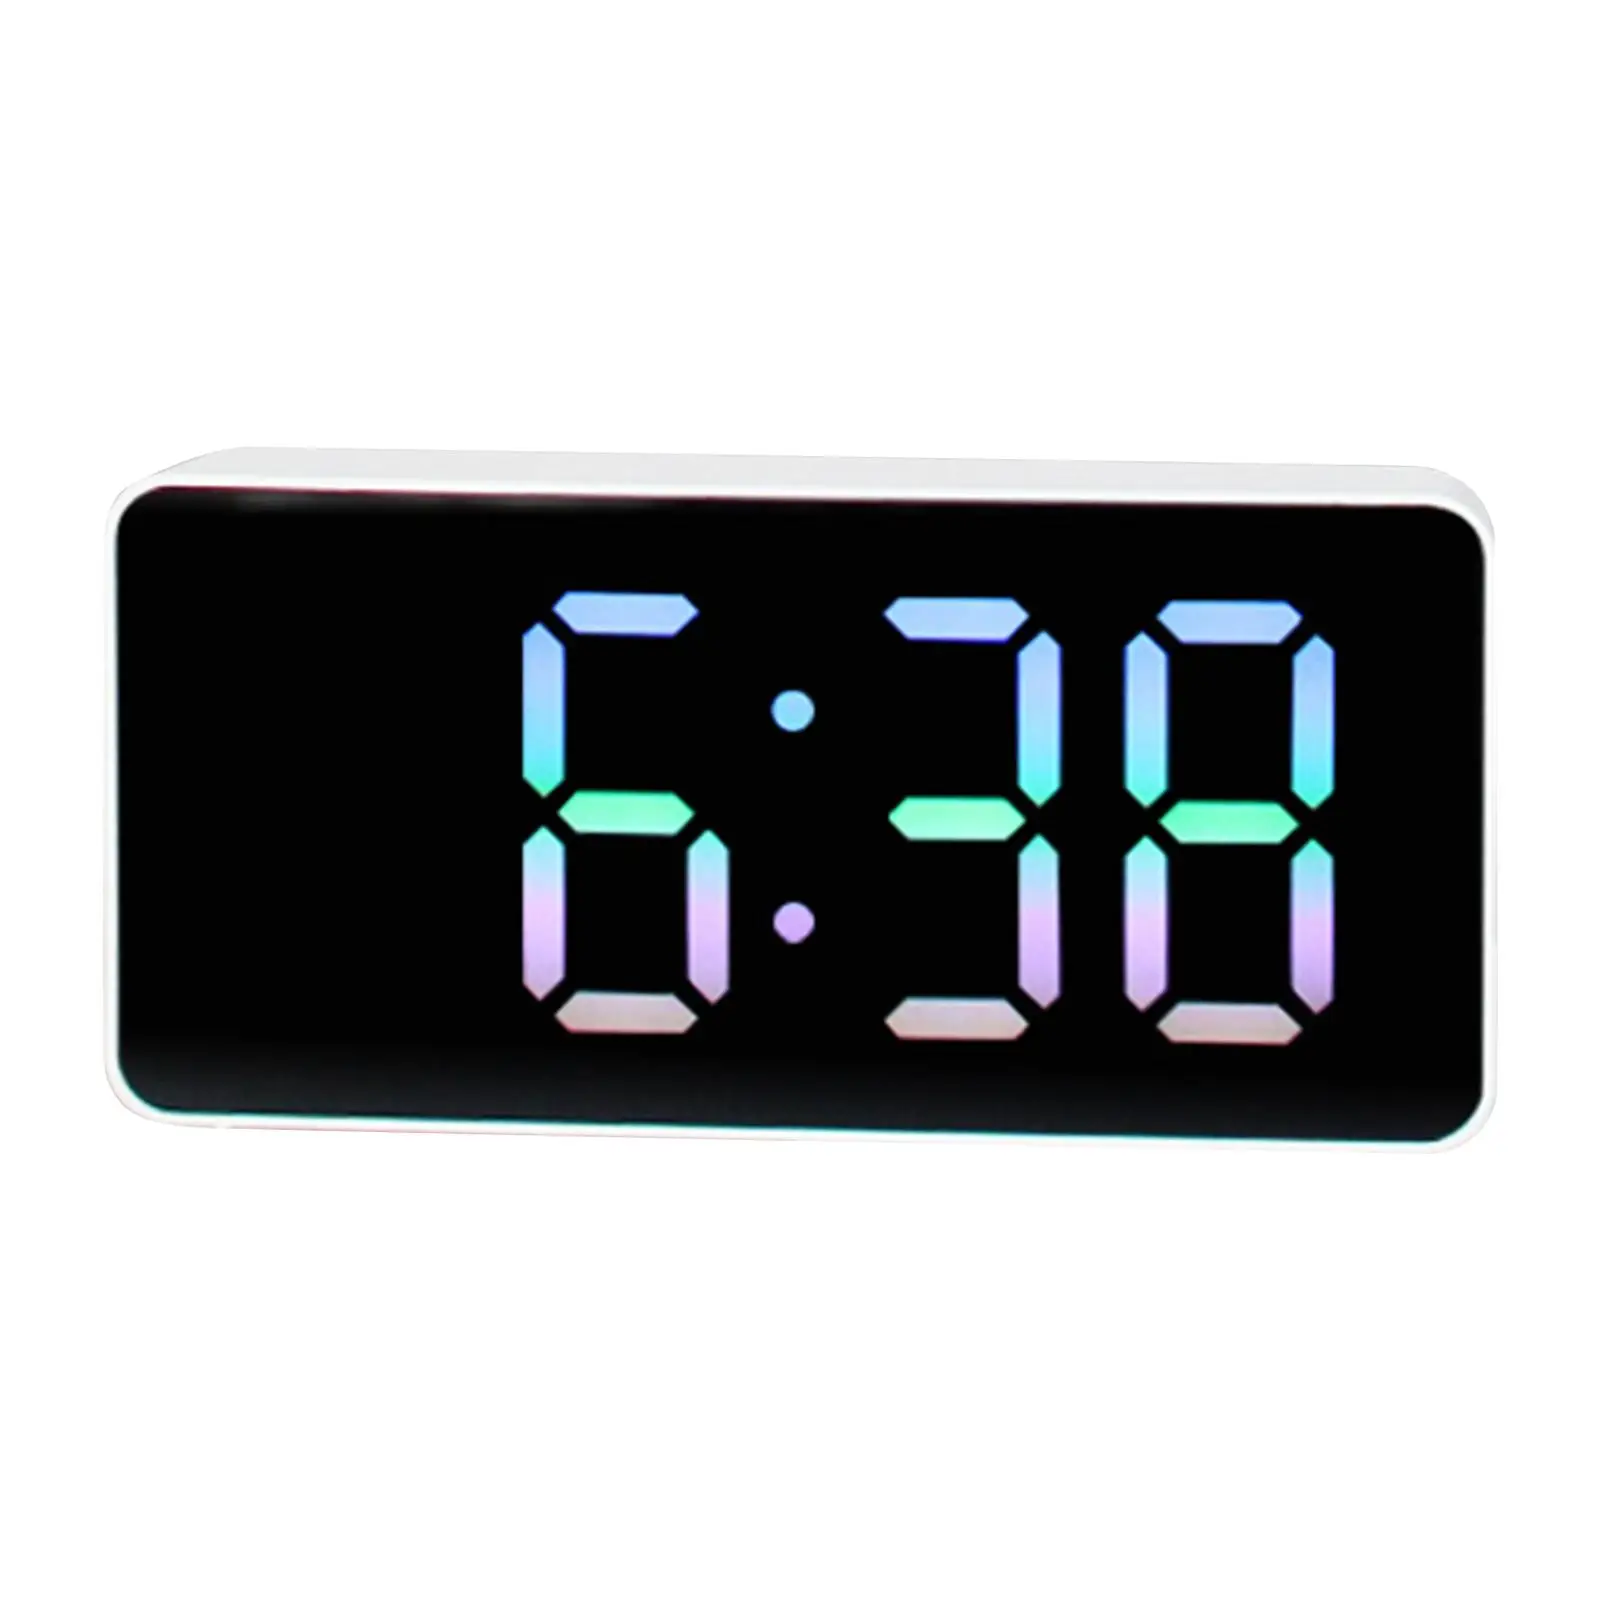 Modern Digital alarms Clock with Date Temperature Display USB Charging Calendar Electronic Clock for Shop Bedside Office Home